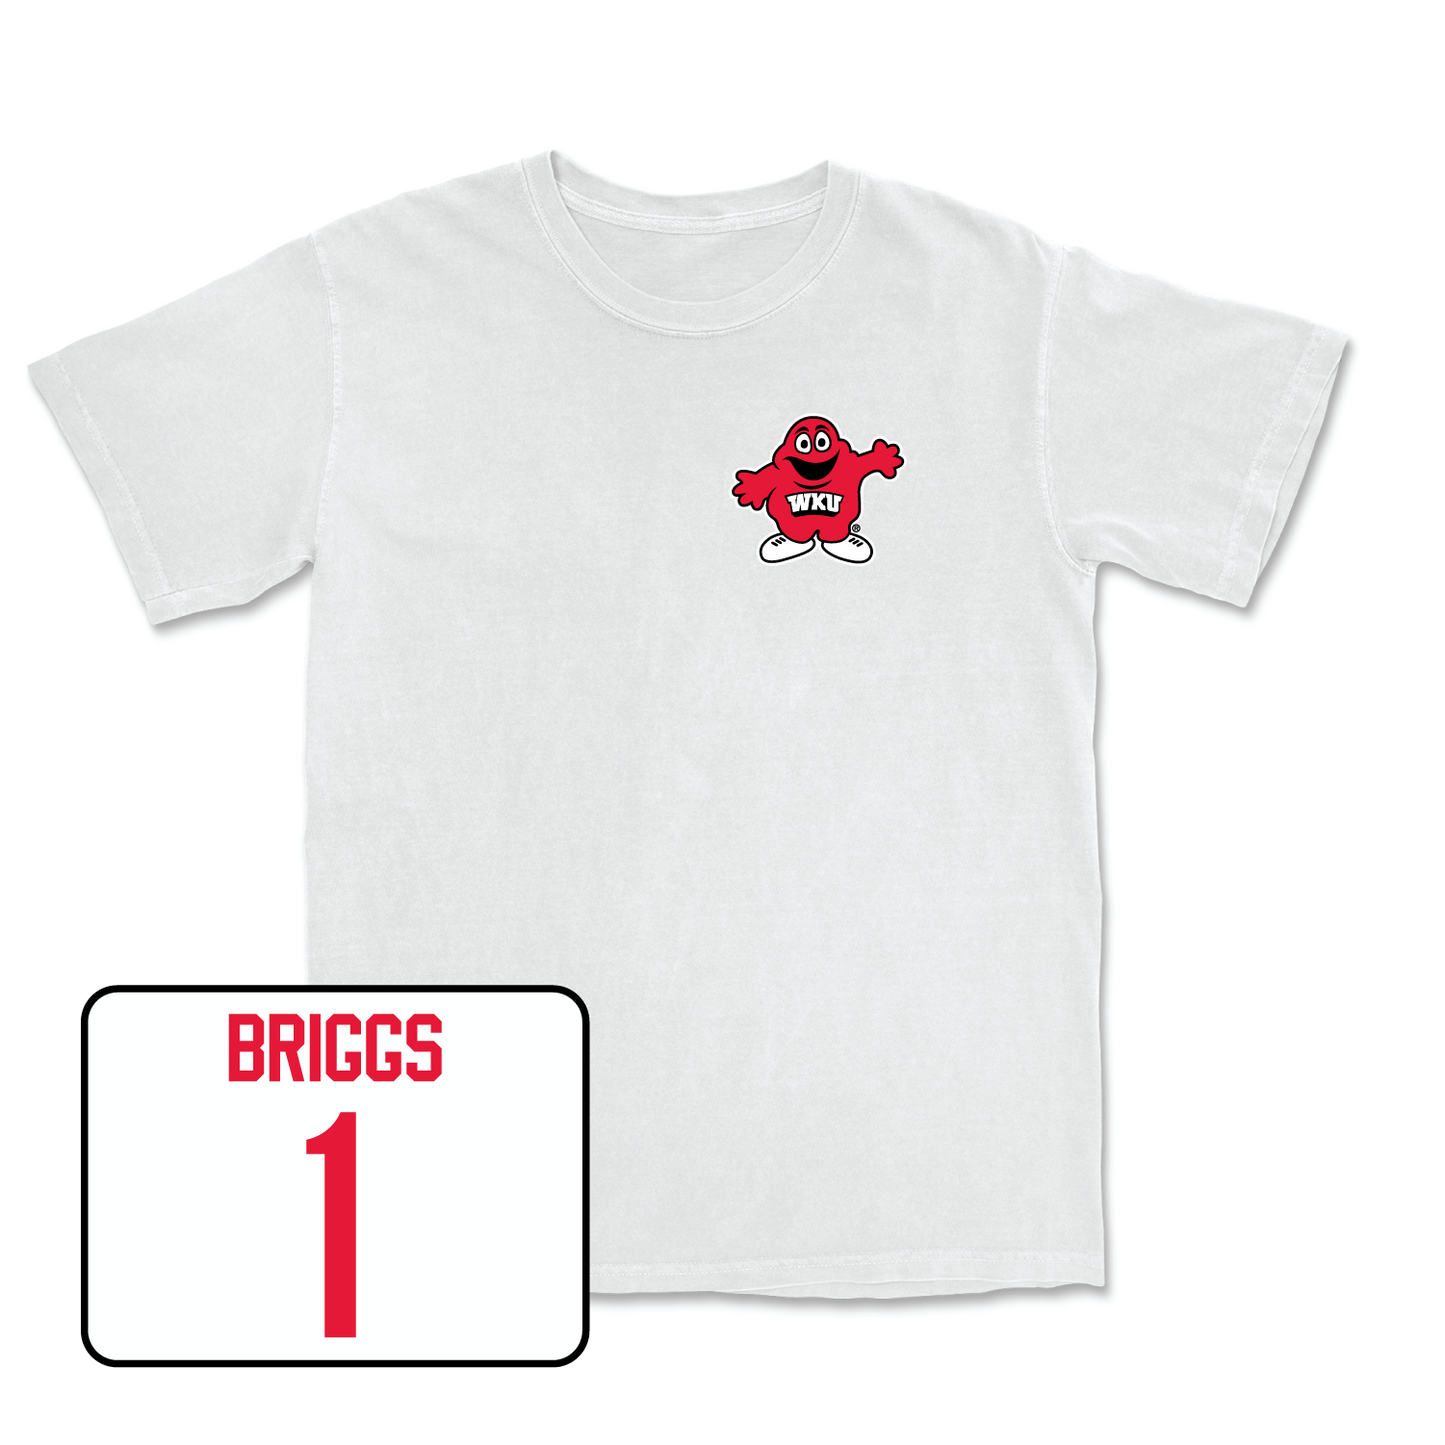 White Women's Volleyball Big Red Comfort Colors Tee Large / Paige Briggs | #1